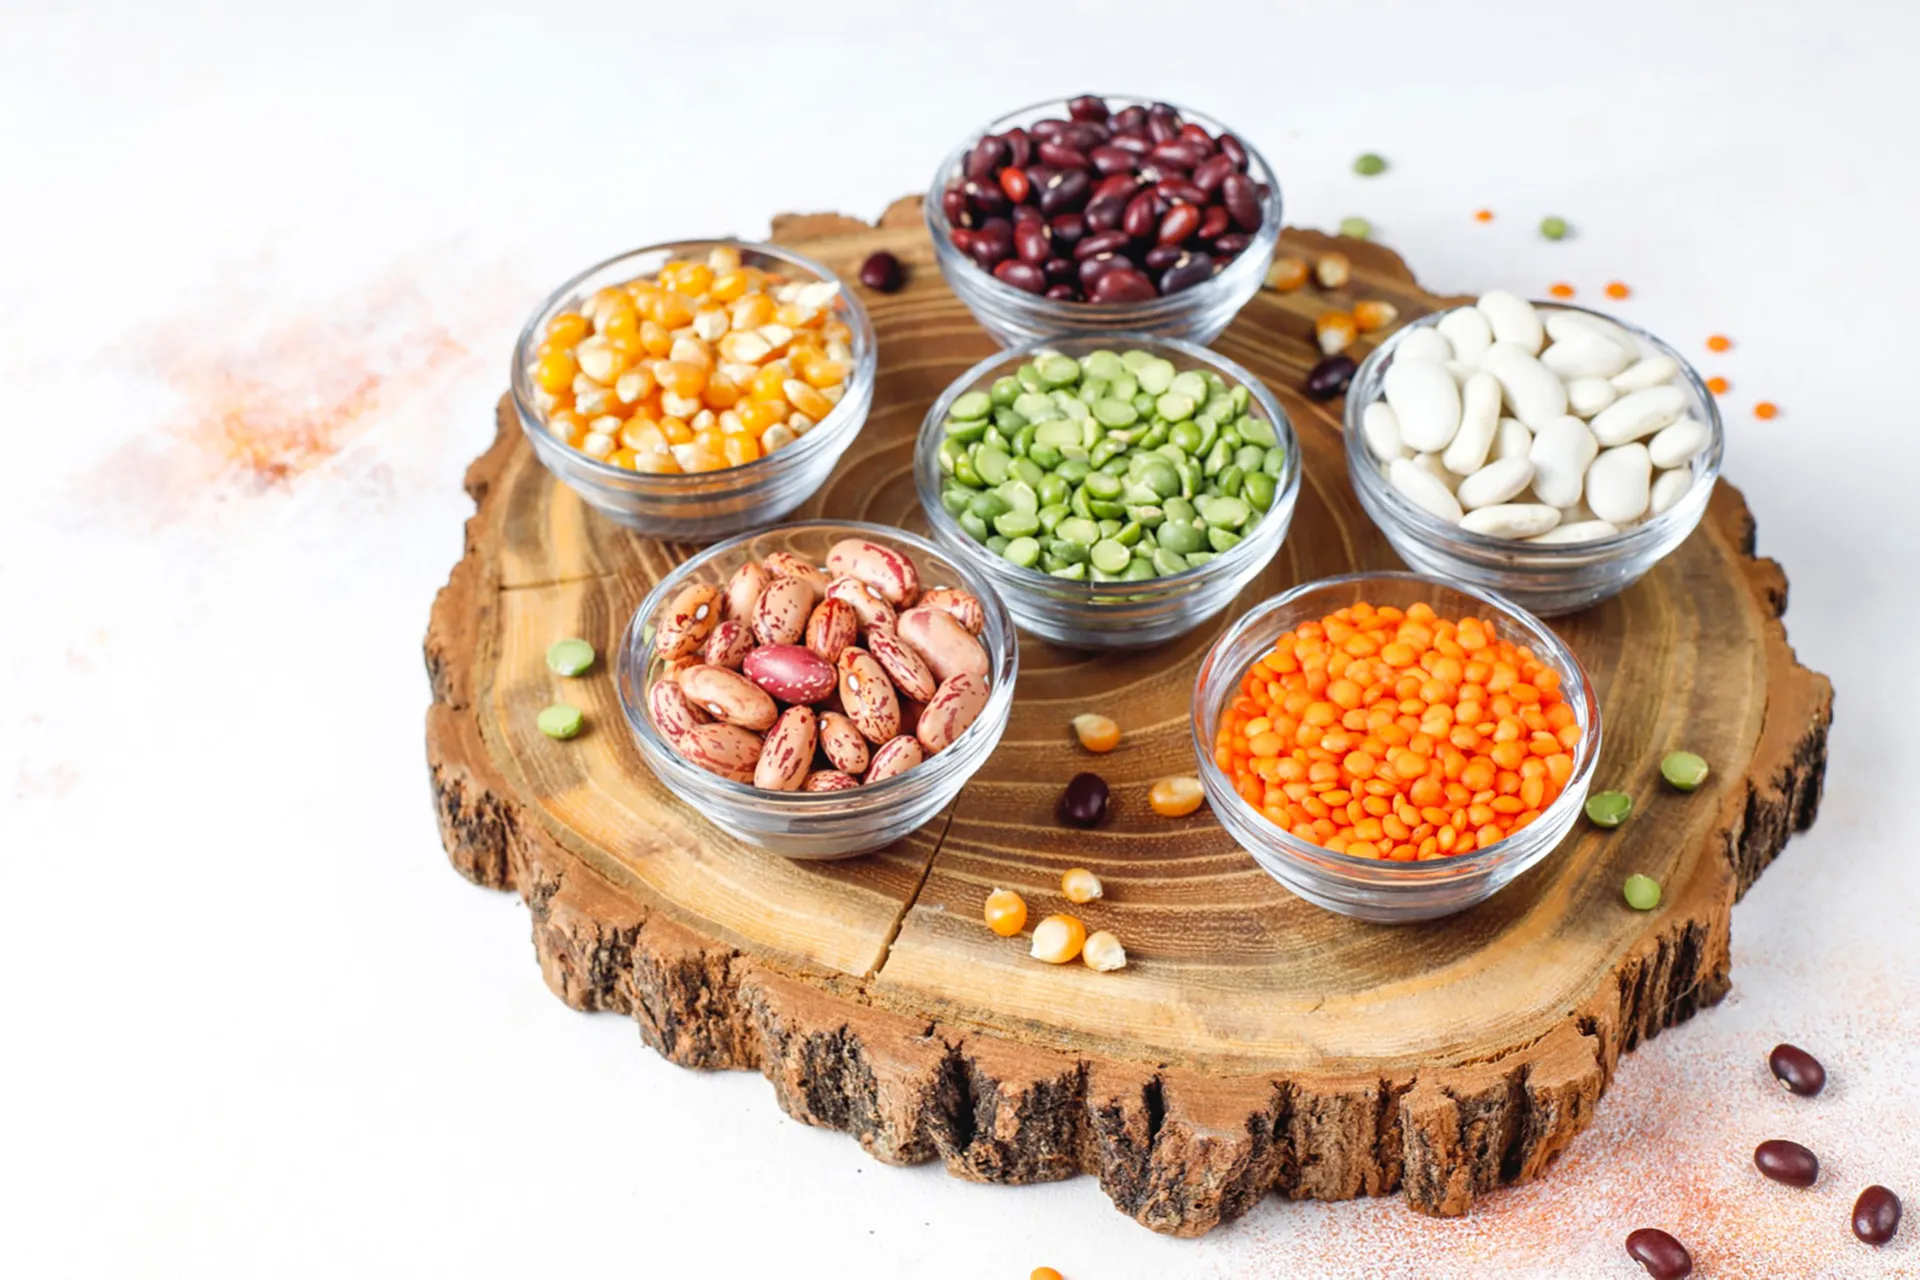 Plant-based protein pros and cons